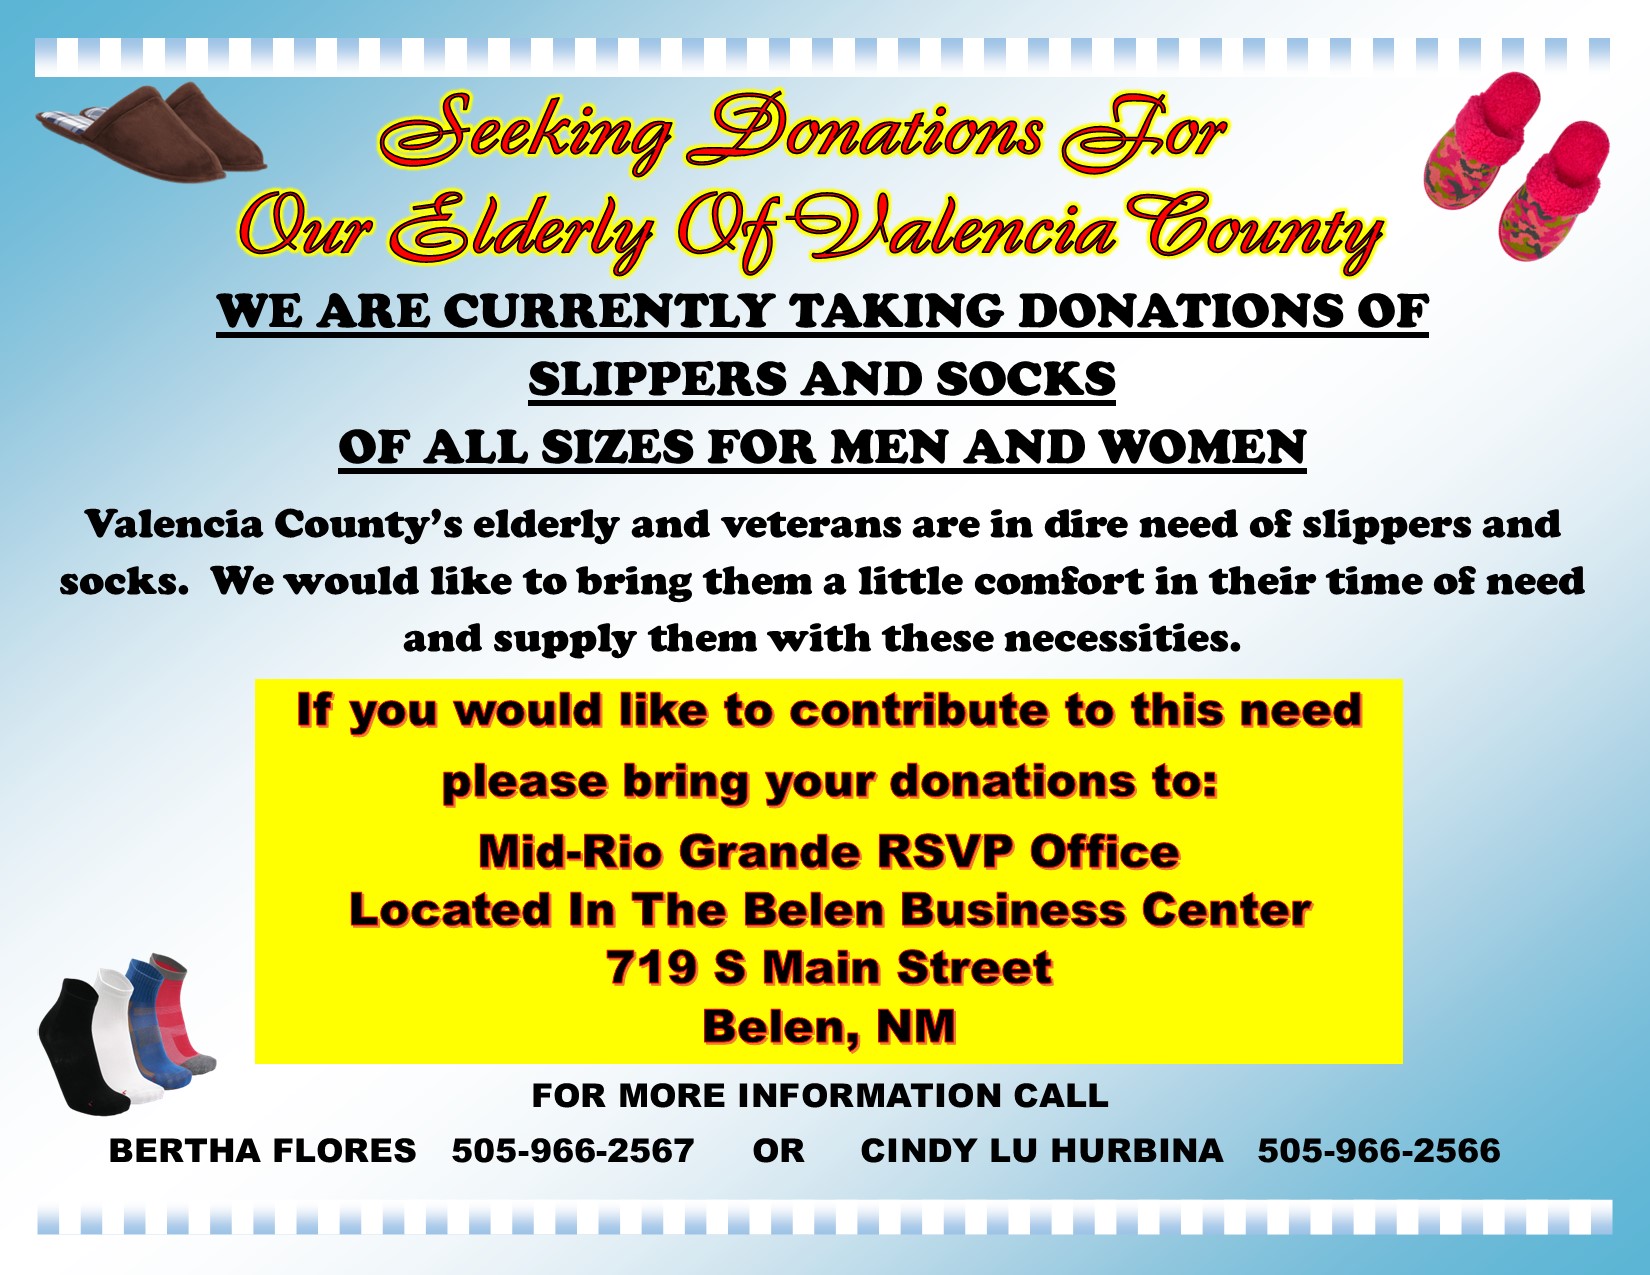 RSVP is taking donations of slippers and socks for our elderly community members. Please bring any size of adult slippers and socks to the Mid Rio-Grande RSVP office at 719 S Main St.